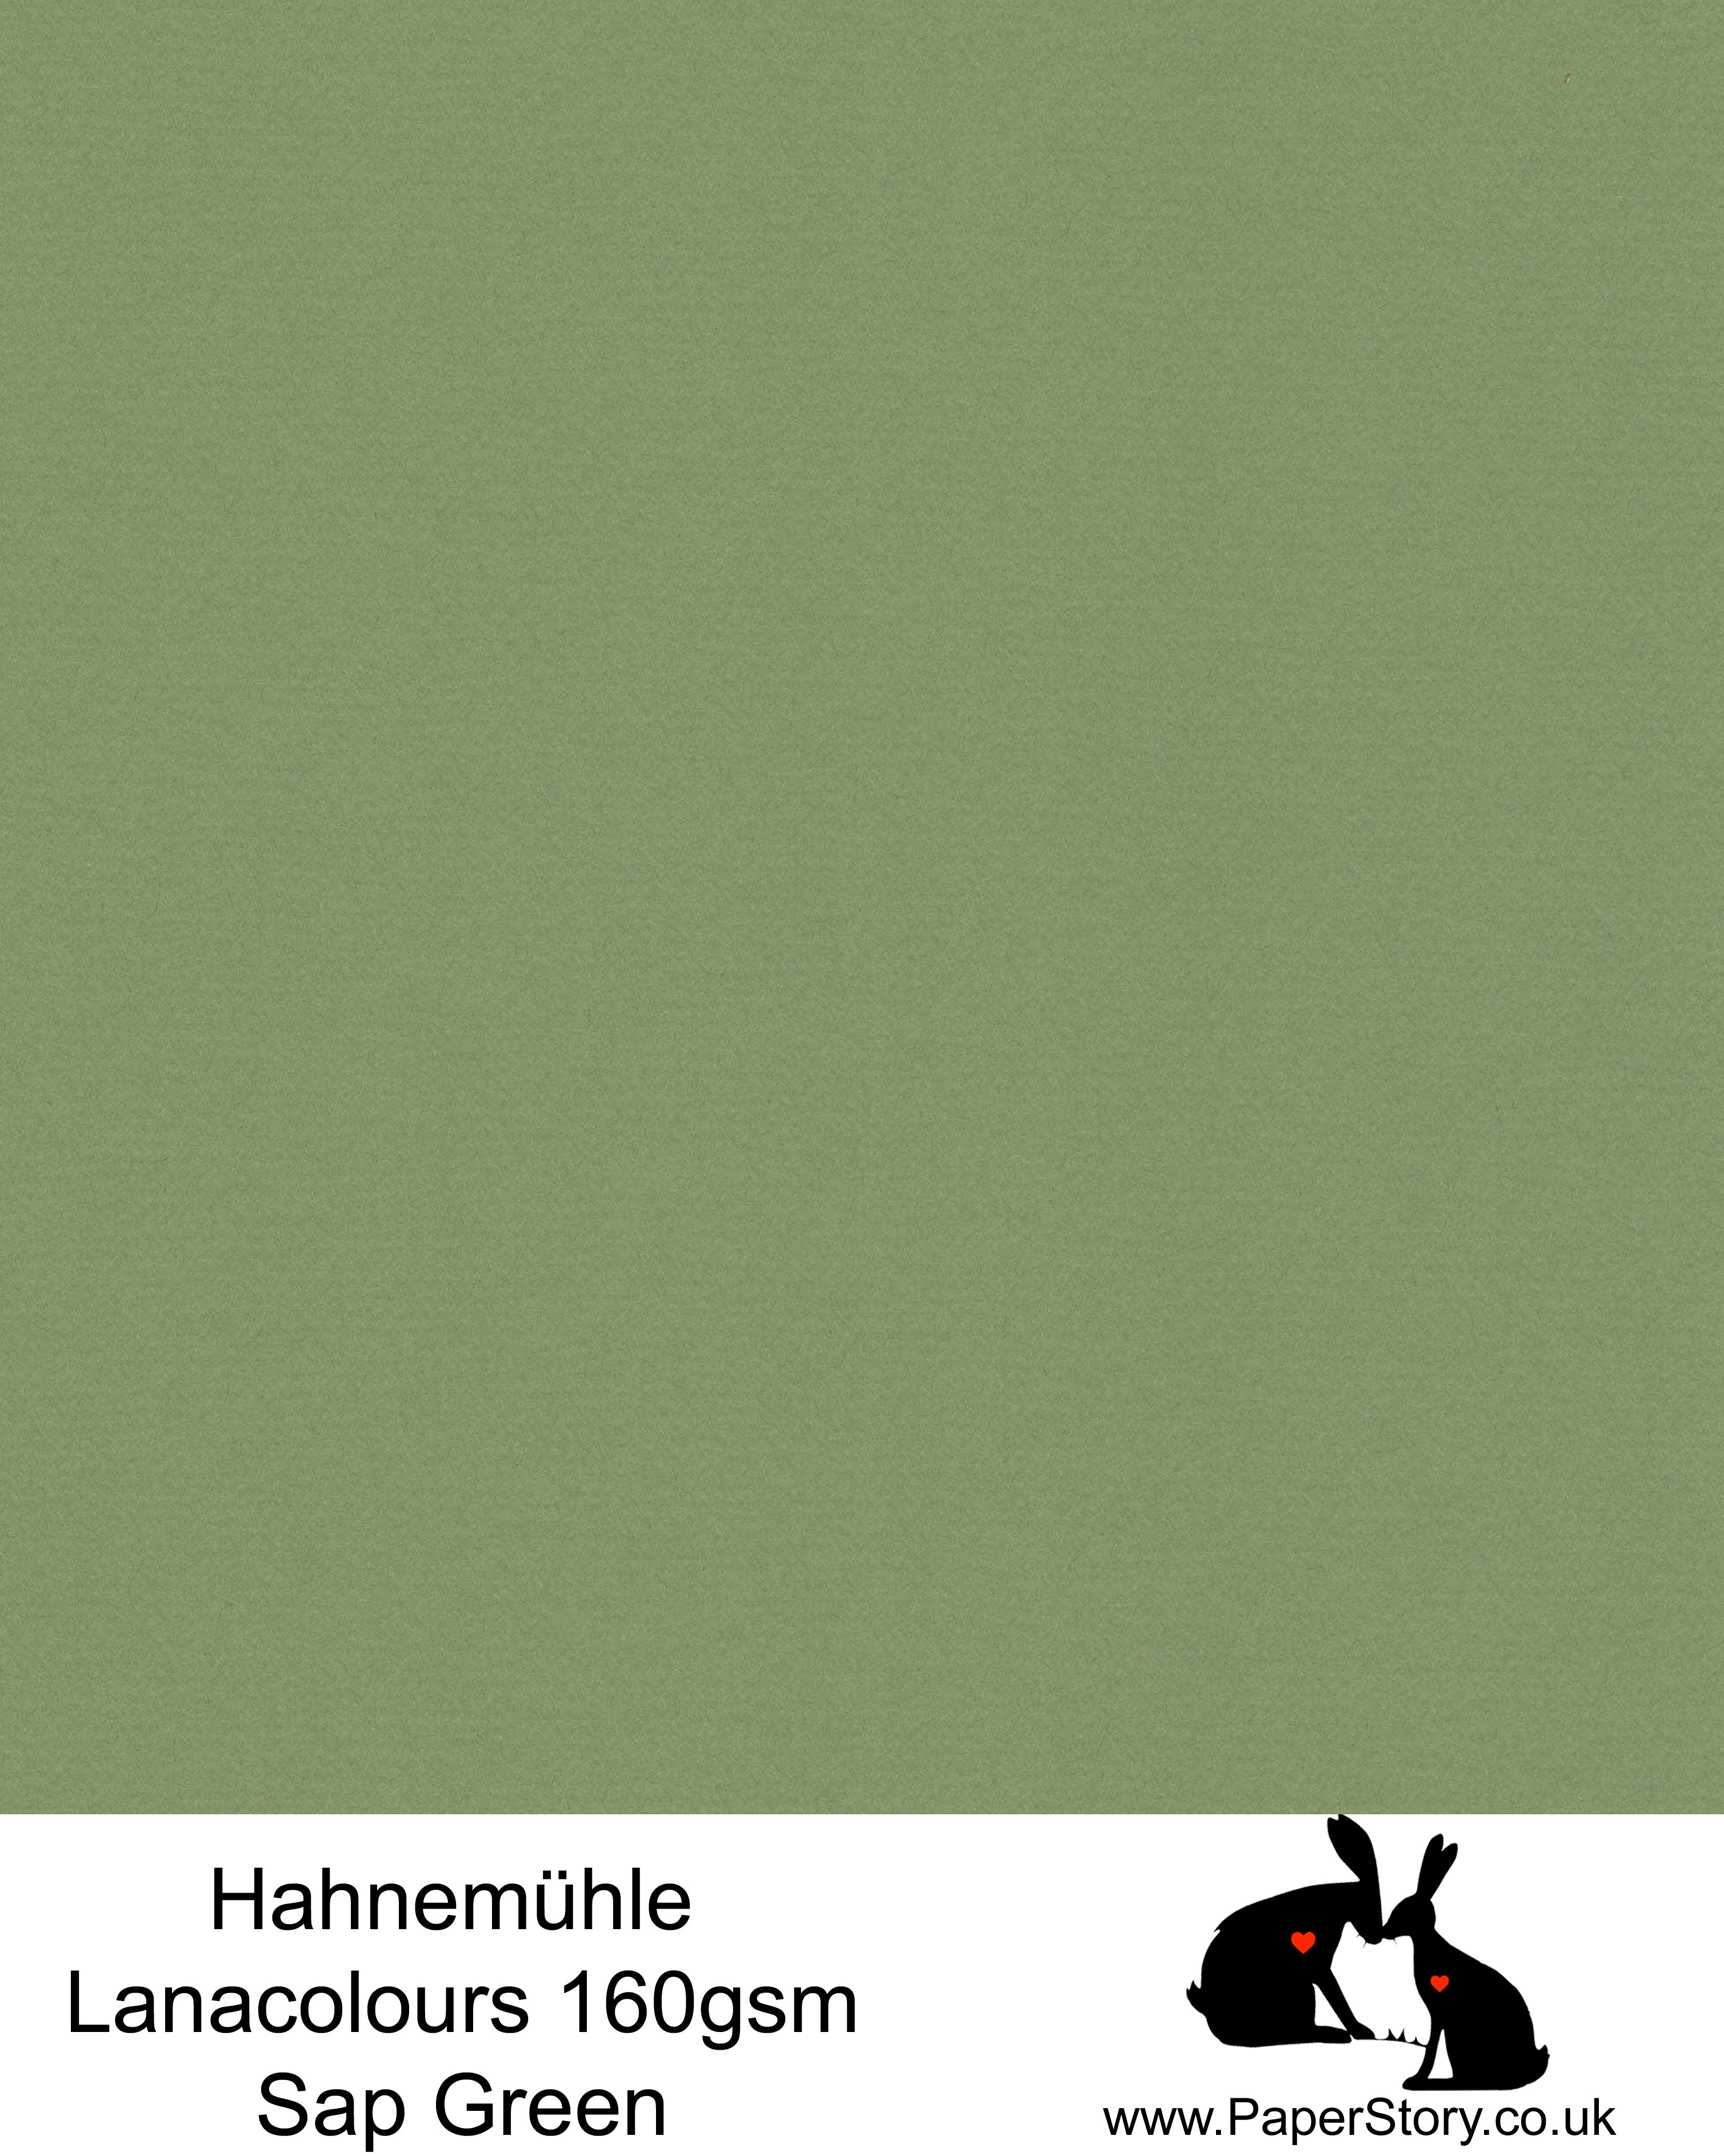 Hahnemühle Lana Colours Sap Green Botanical pastel hammered paper 160 gsm. Artist Premium Pastel and Papercutting Papers 160 gsm often described as hammered paper